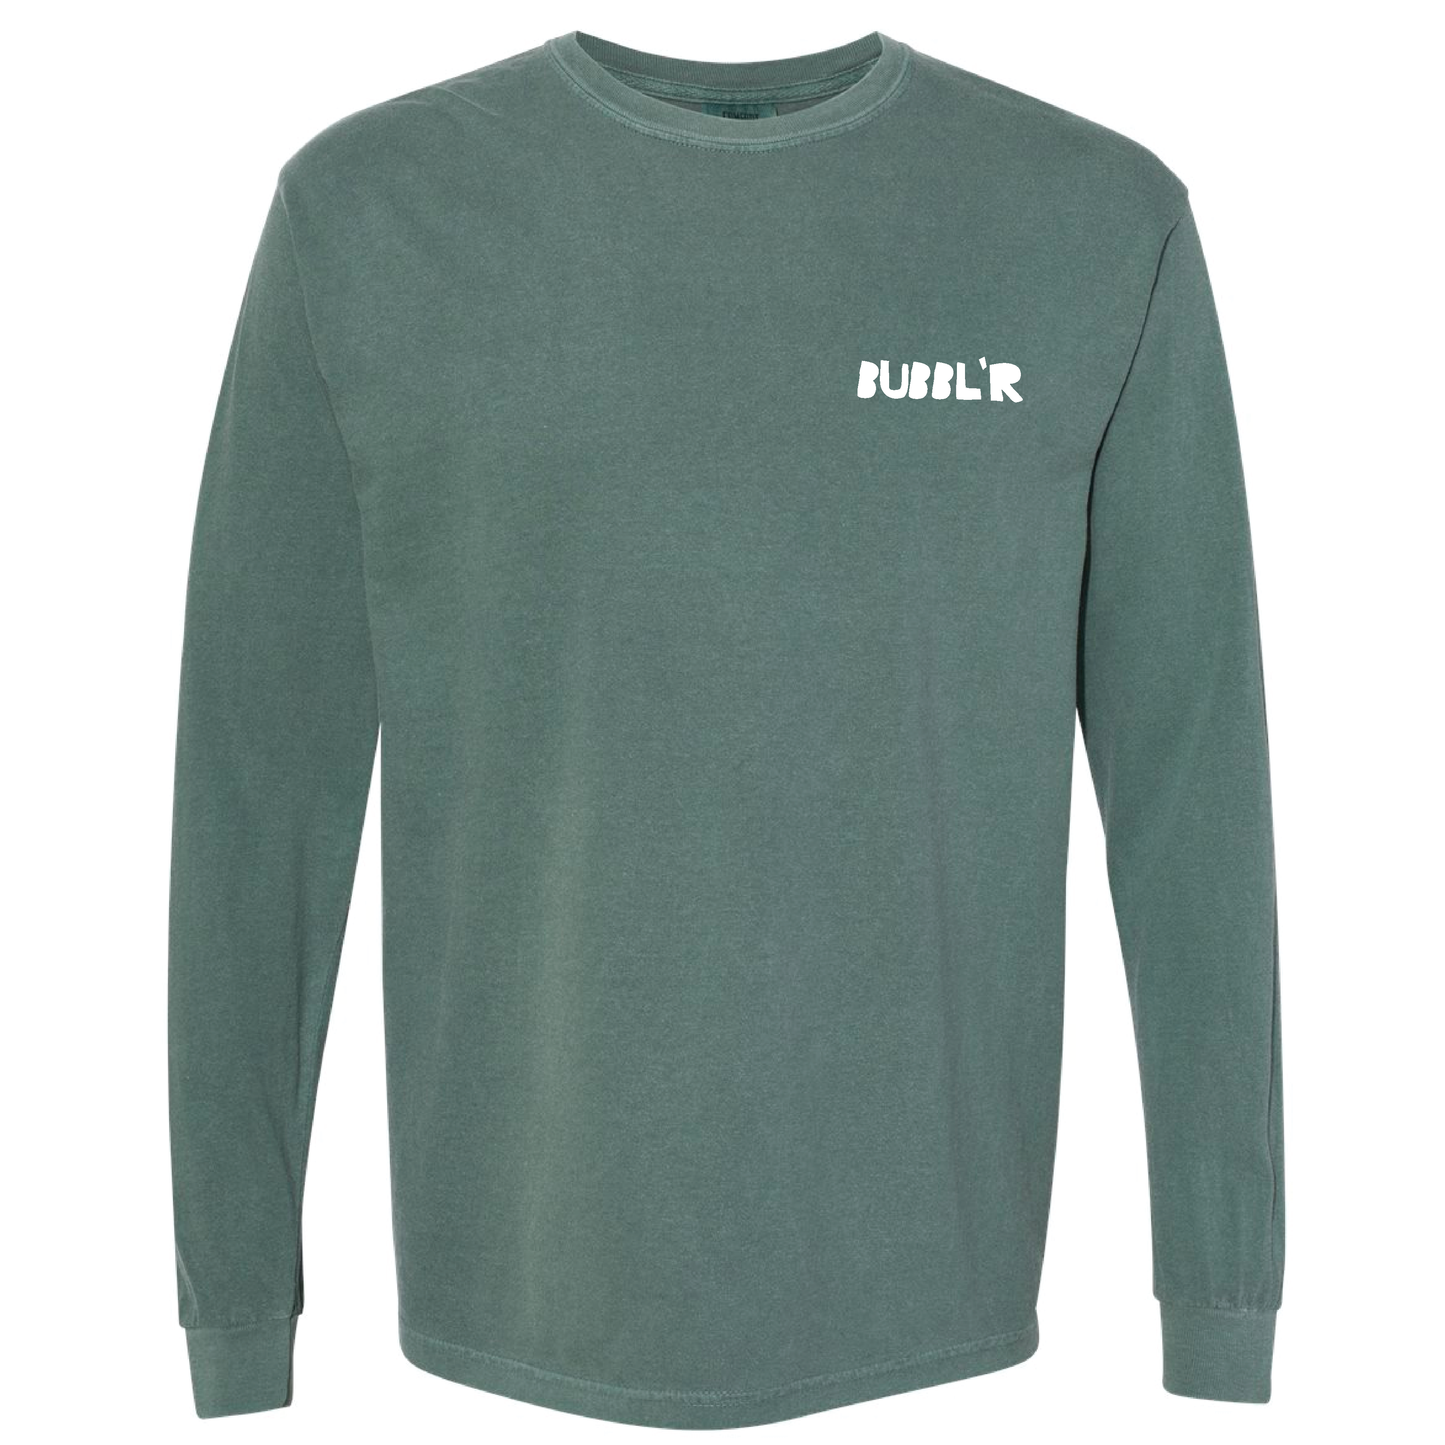 dark teal long tee with white bubbl'r logo on left chest